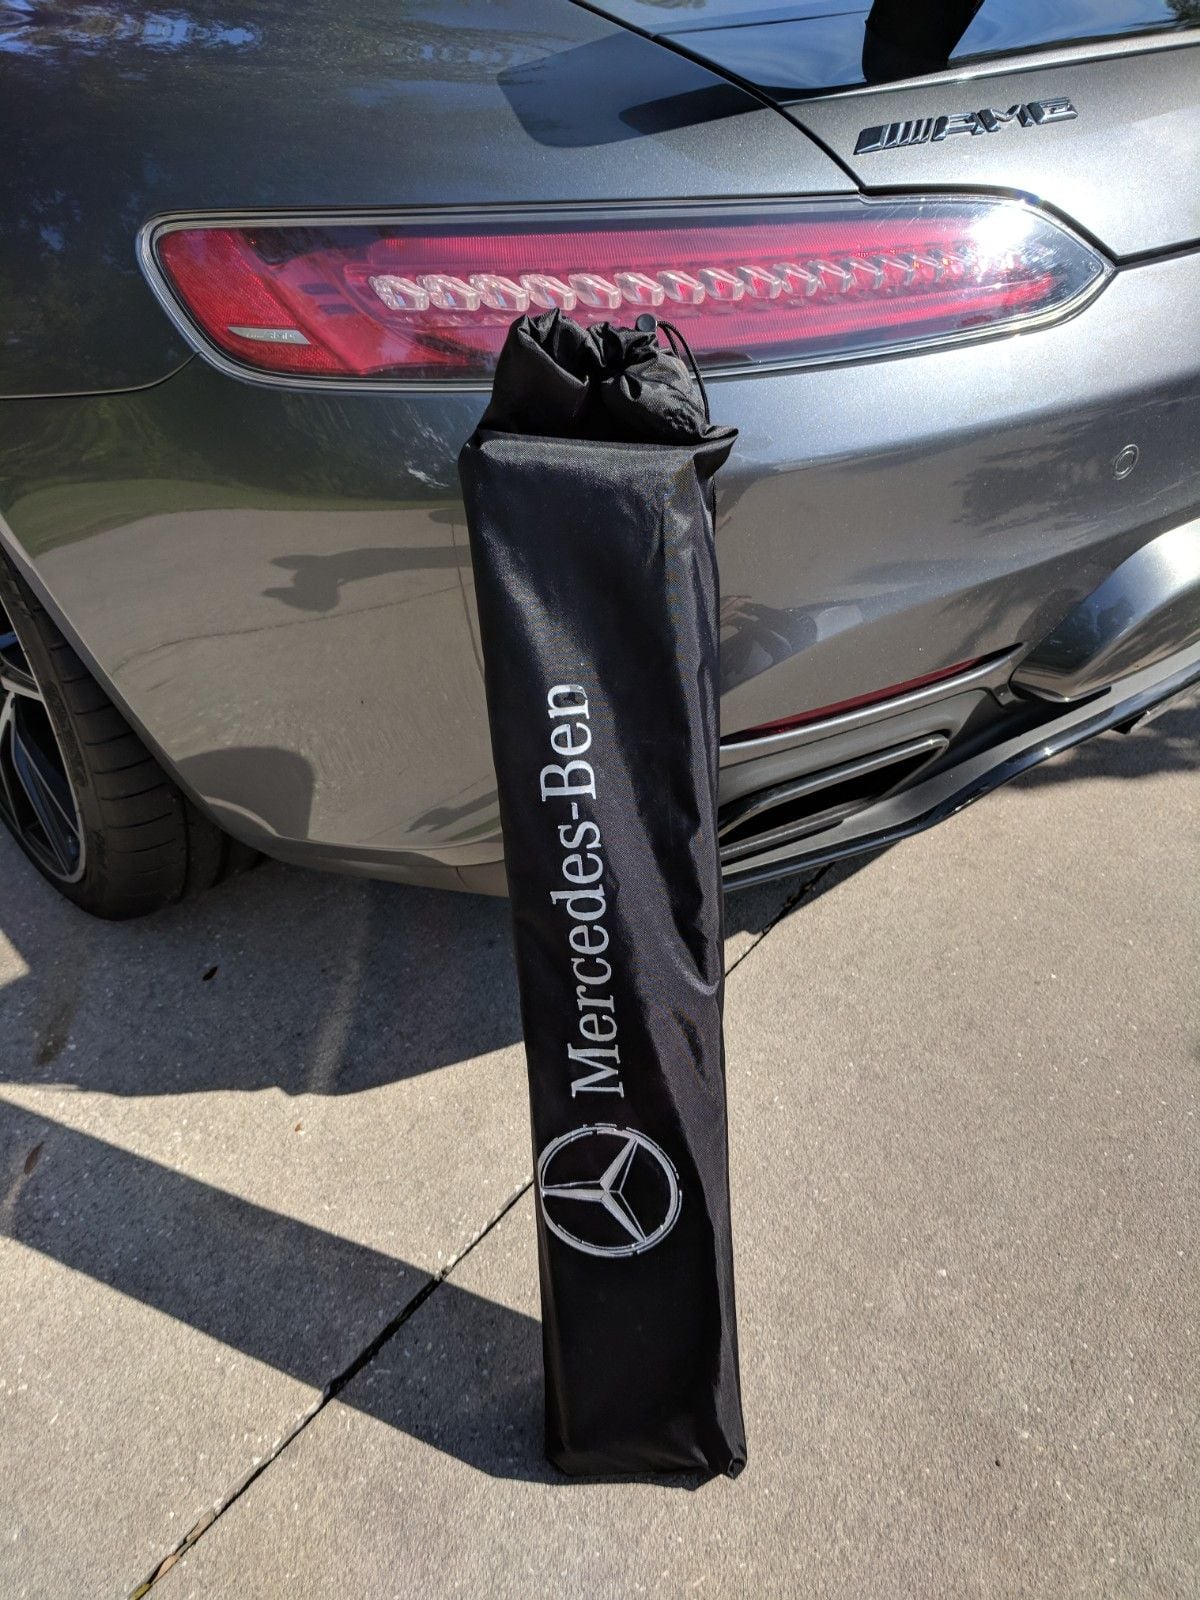 Accessories - C450/C43 Sun Shade (OEM) - Used - 2017 to 2019 Mercedes-Benz C43 AMG - 2016 Mercedes-Benz C450 AMG - Tampa, FL 33556, United States